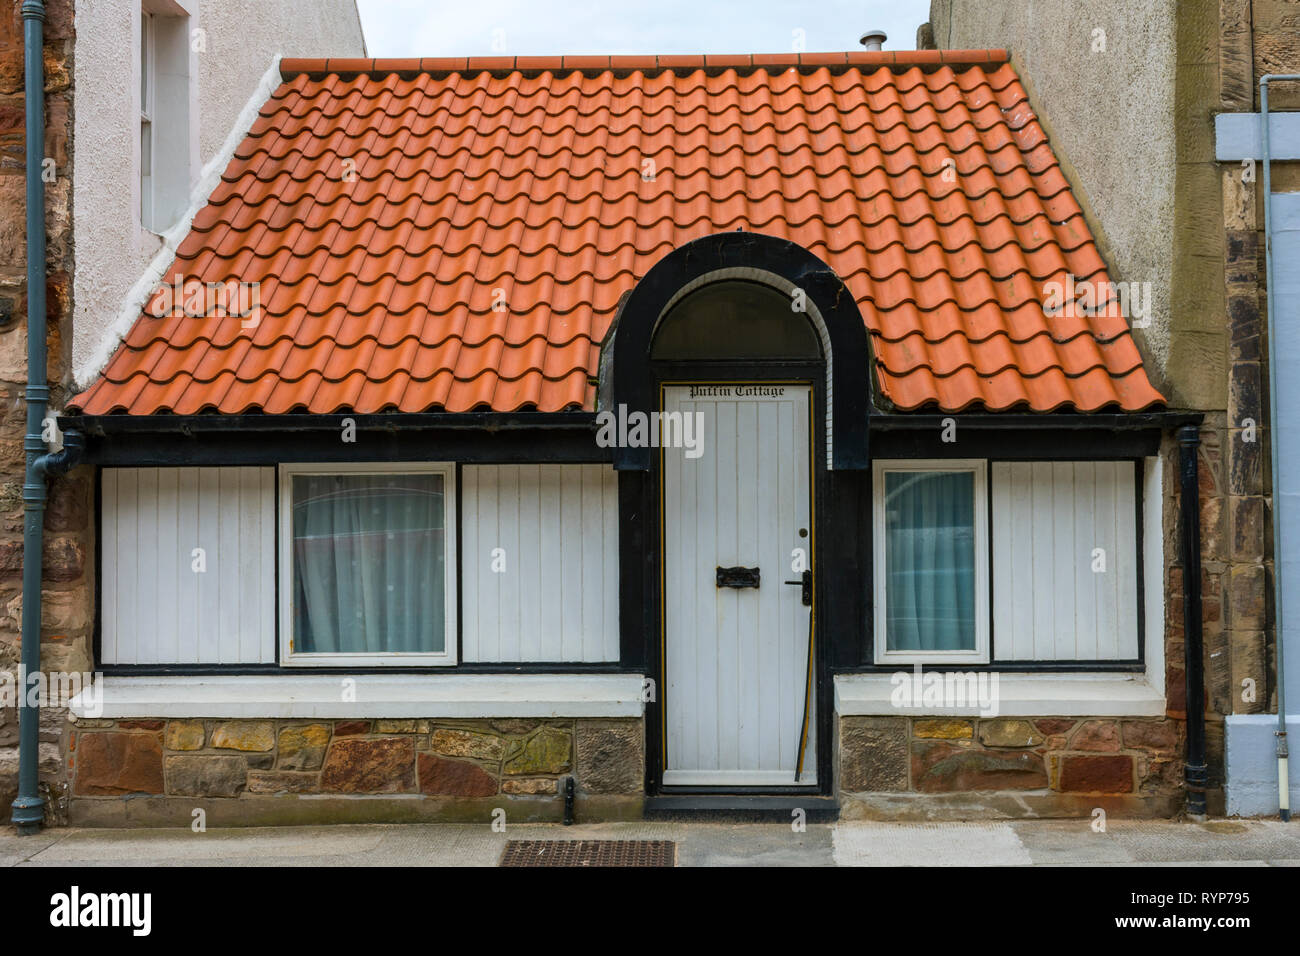 A small single storey house in the town of North Berwick, East Lothian, Scotland, UK Stock Photo